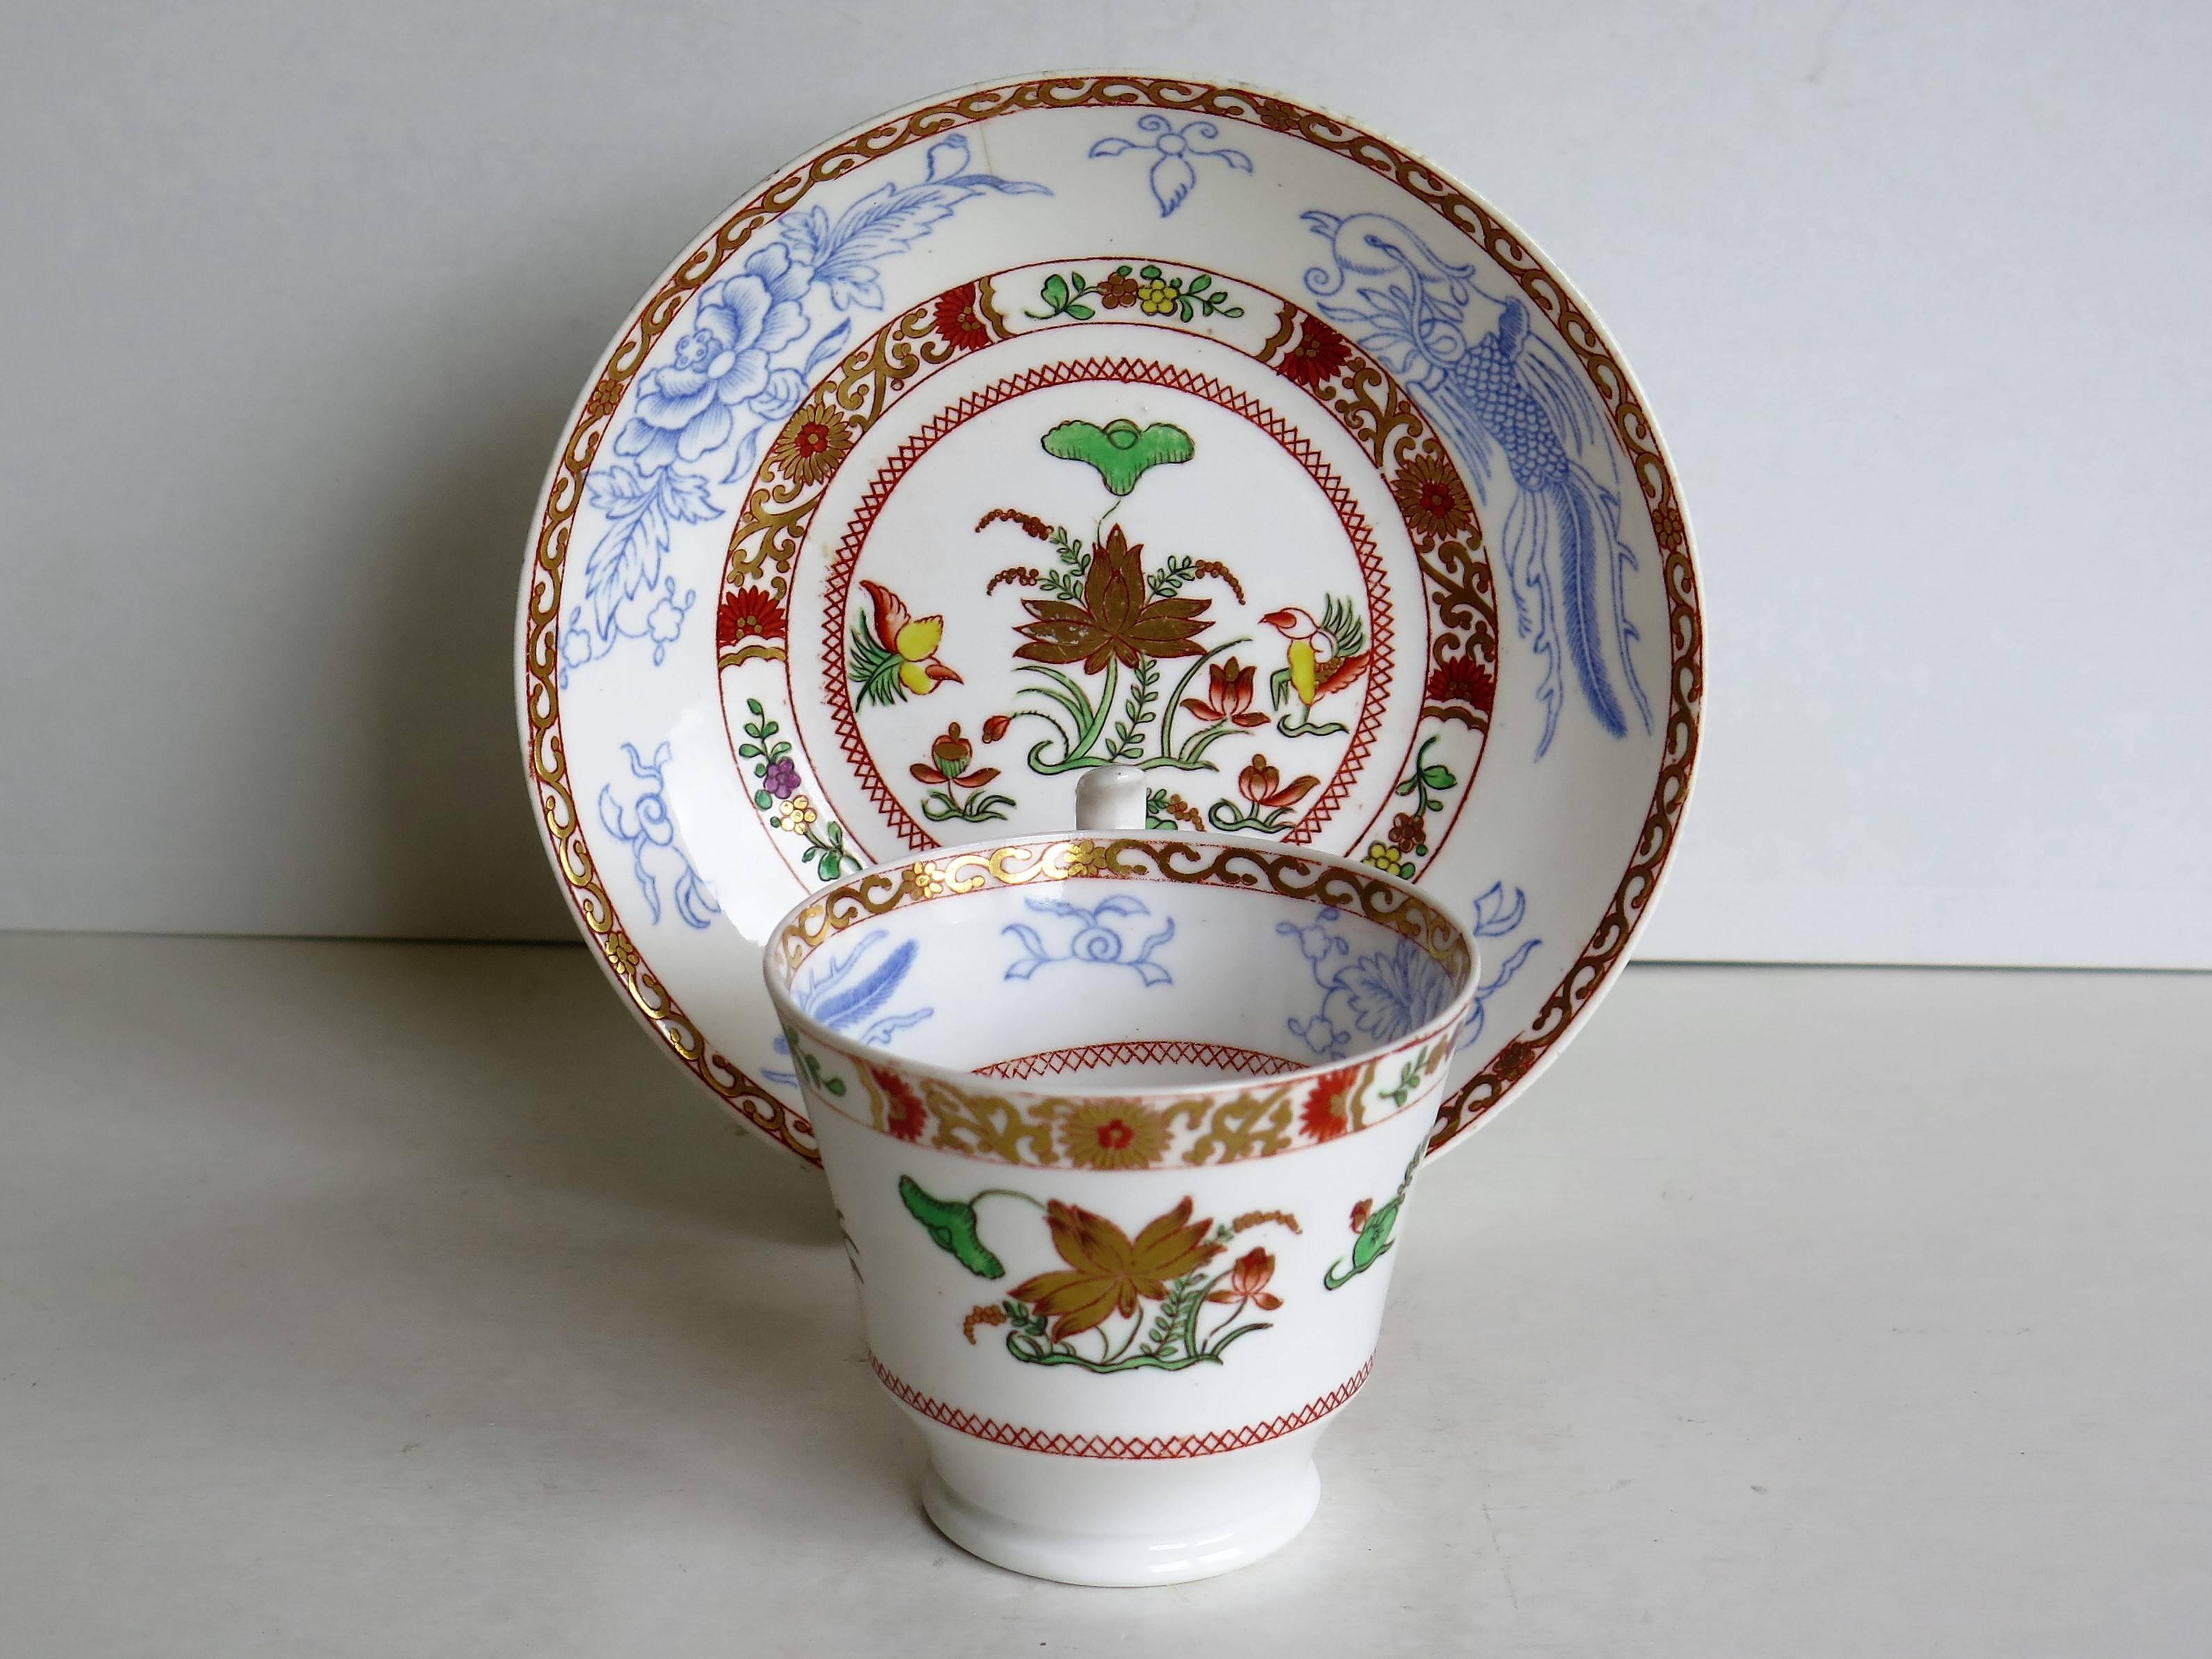 This is a fine porcelain coffee cup and saucer made by Spode, England and dates to the early 19th century, circa 1815.

The cup has the The ‘London’ shape with a curvy 